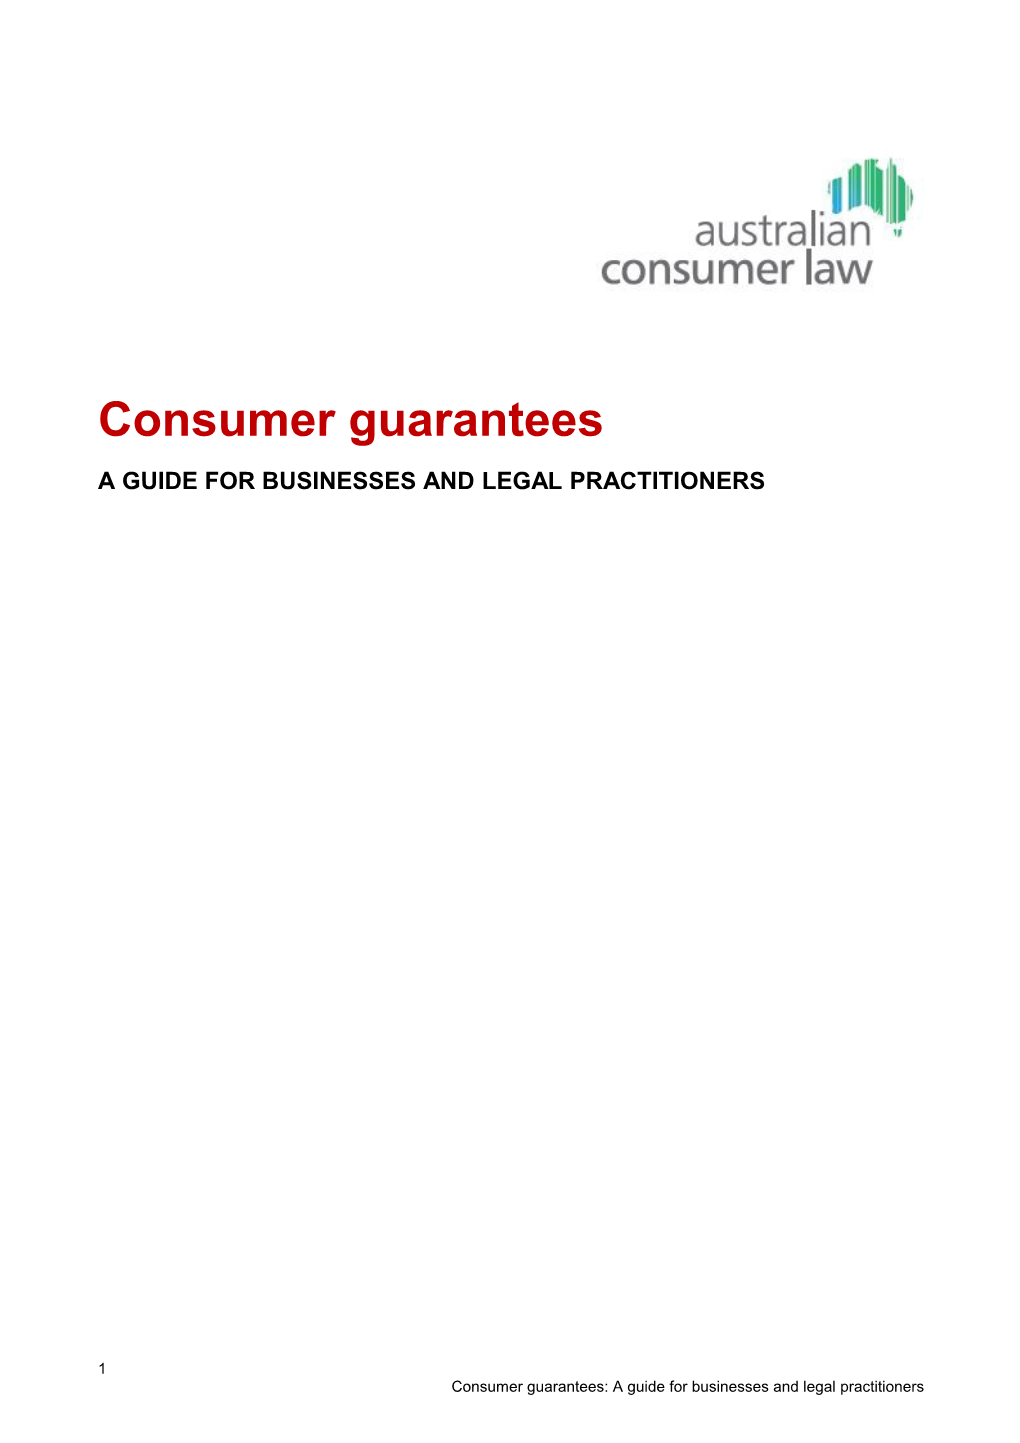 Consumer Guarantees - a Guide for Businesses and Legal Practitioners